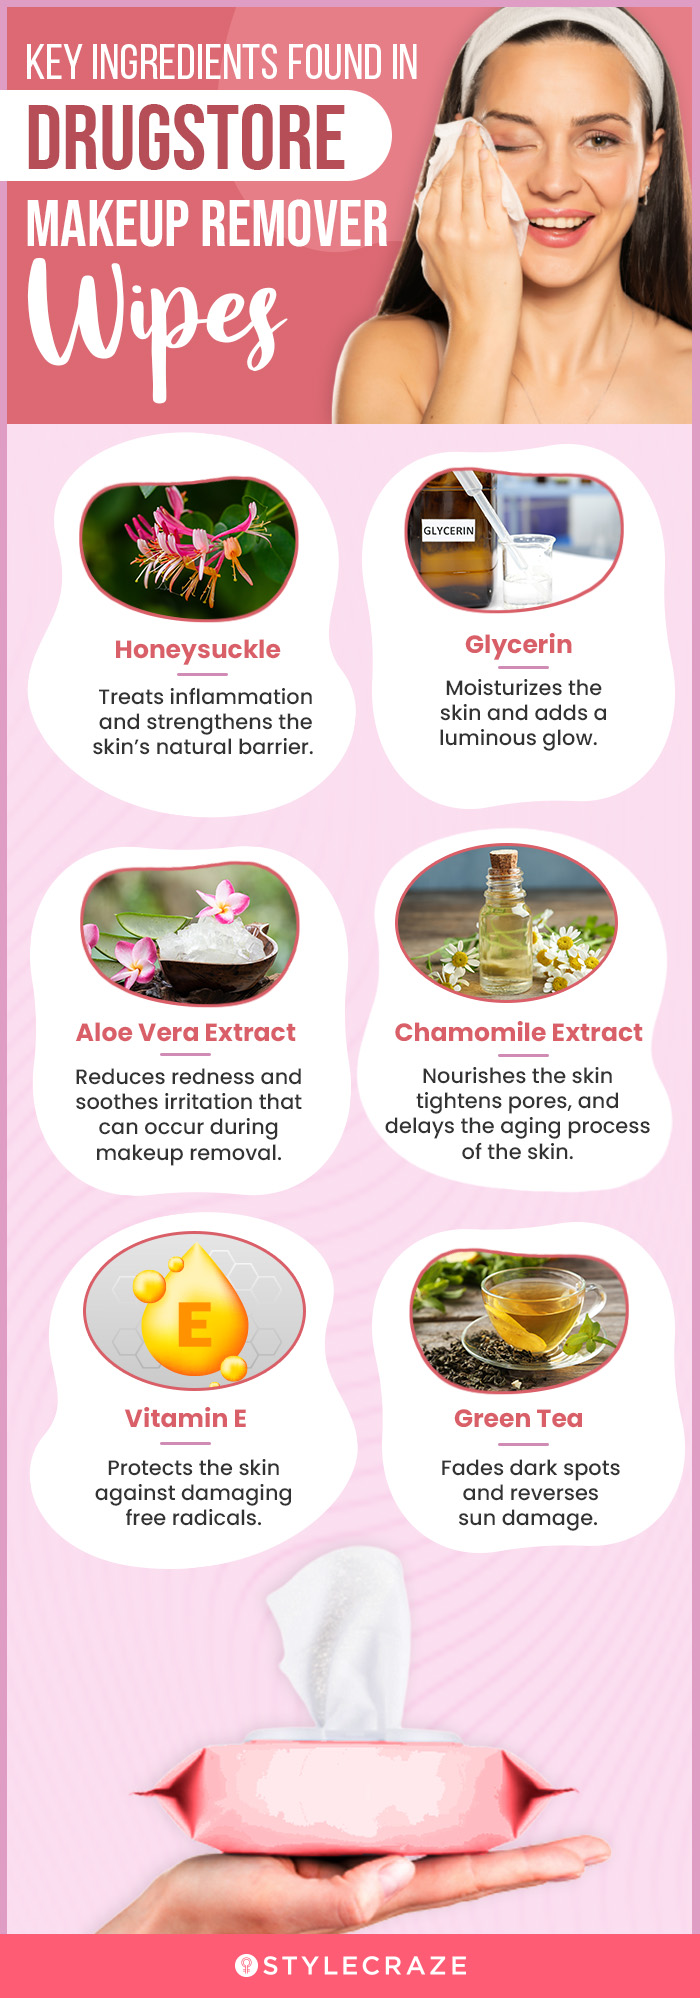 Key Ingredients Found In Drugstore Makeup Remover Wipes (infographic)